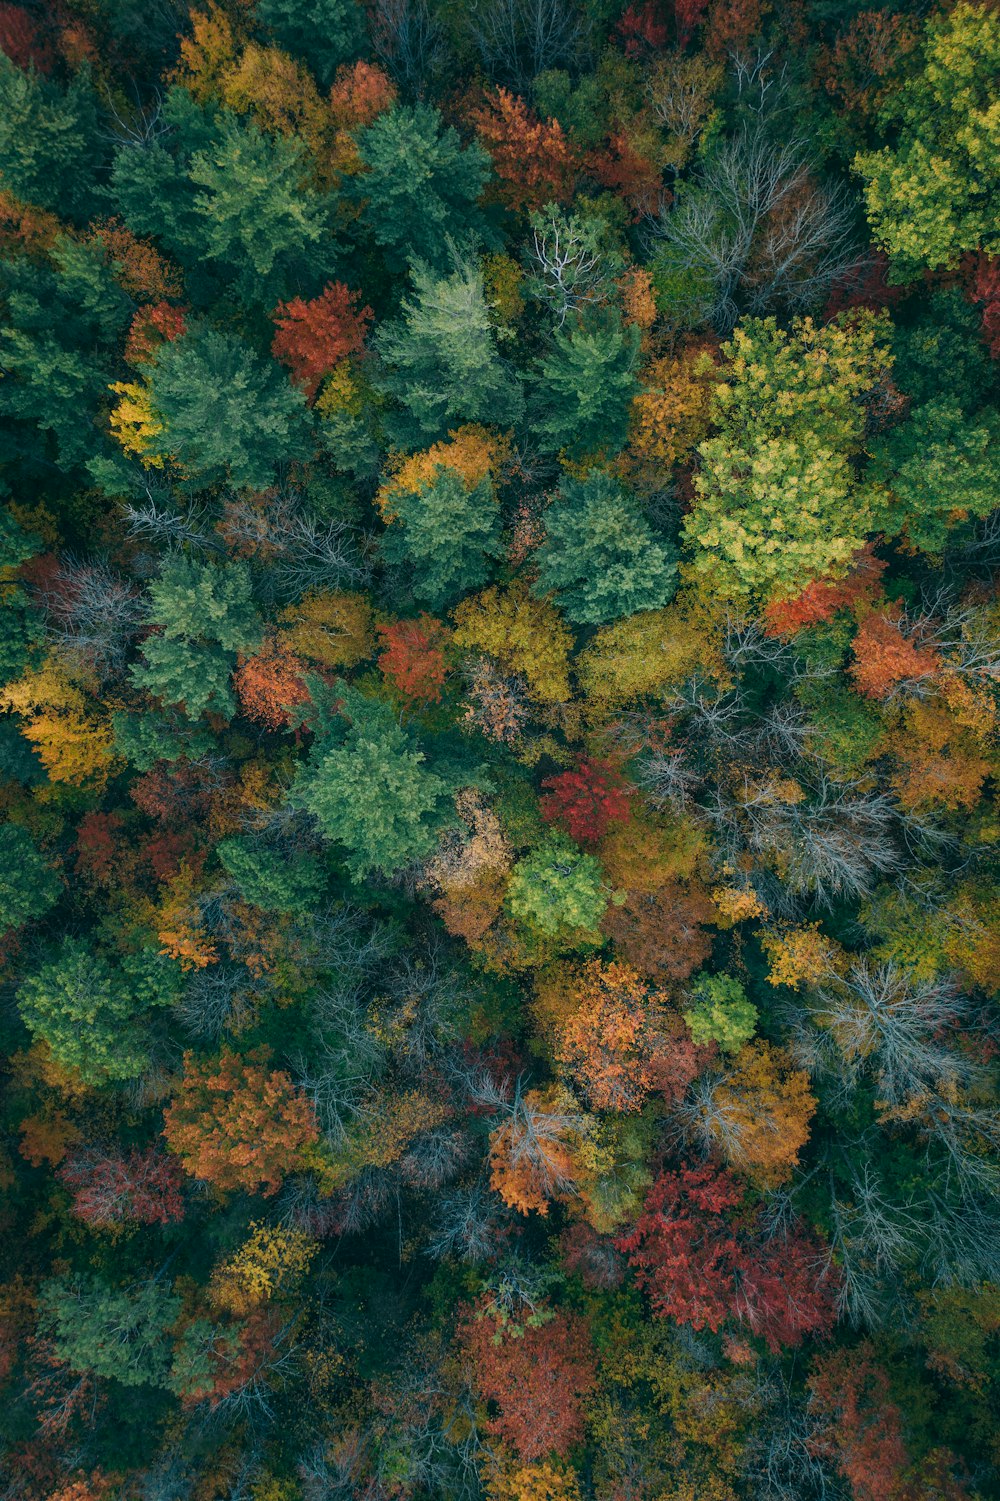 a forest filled with lots of different colored trees